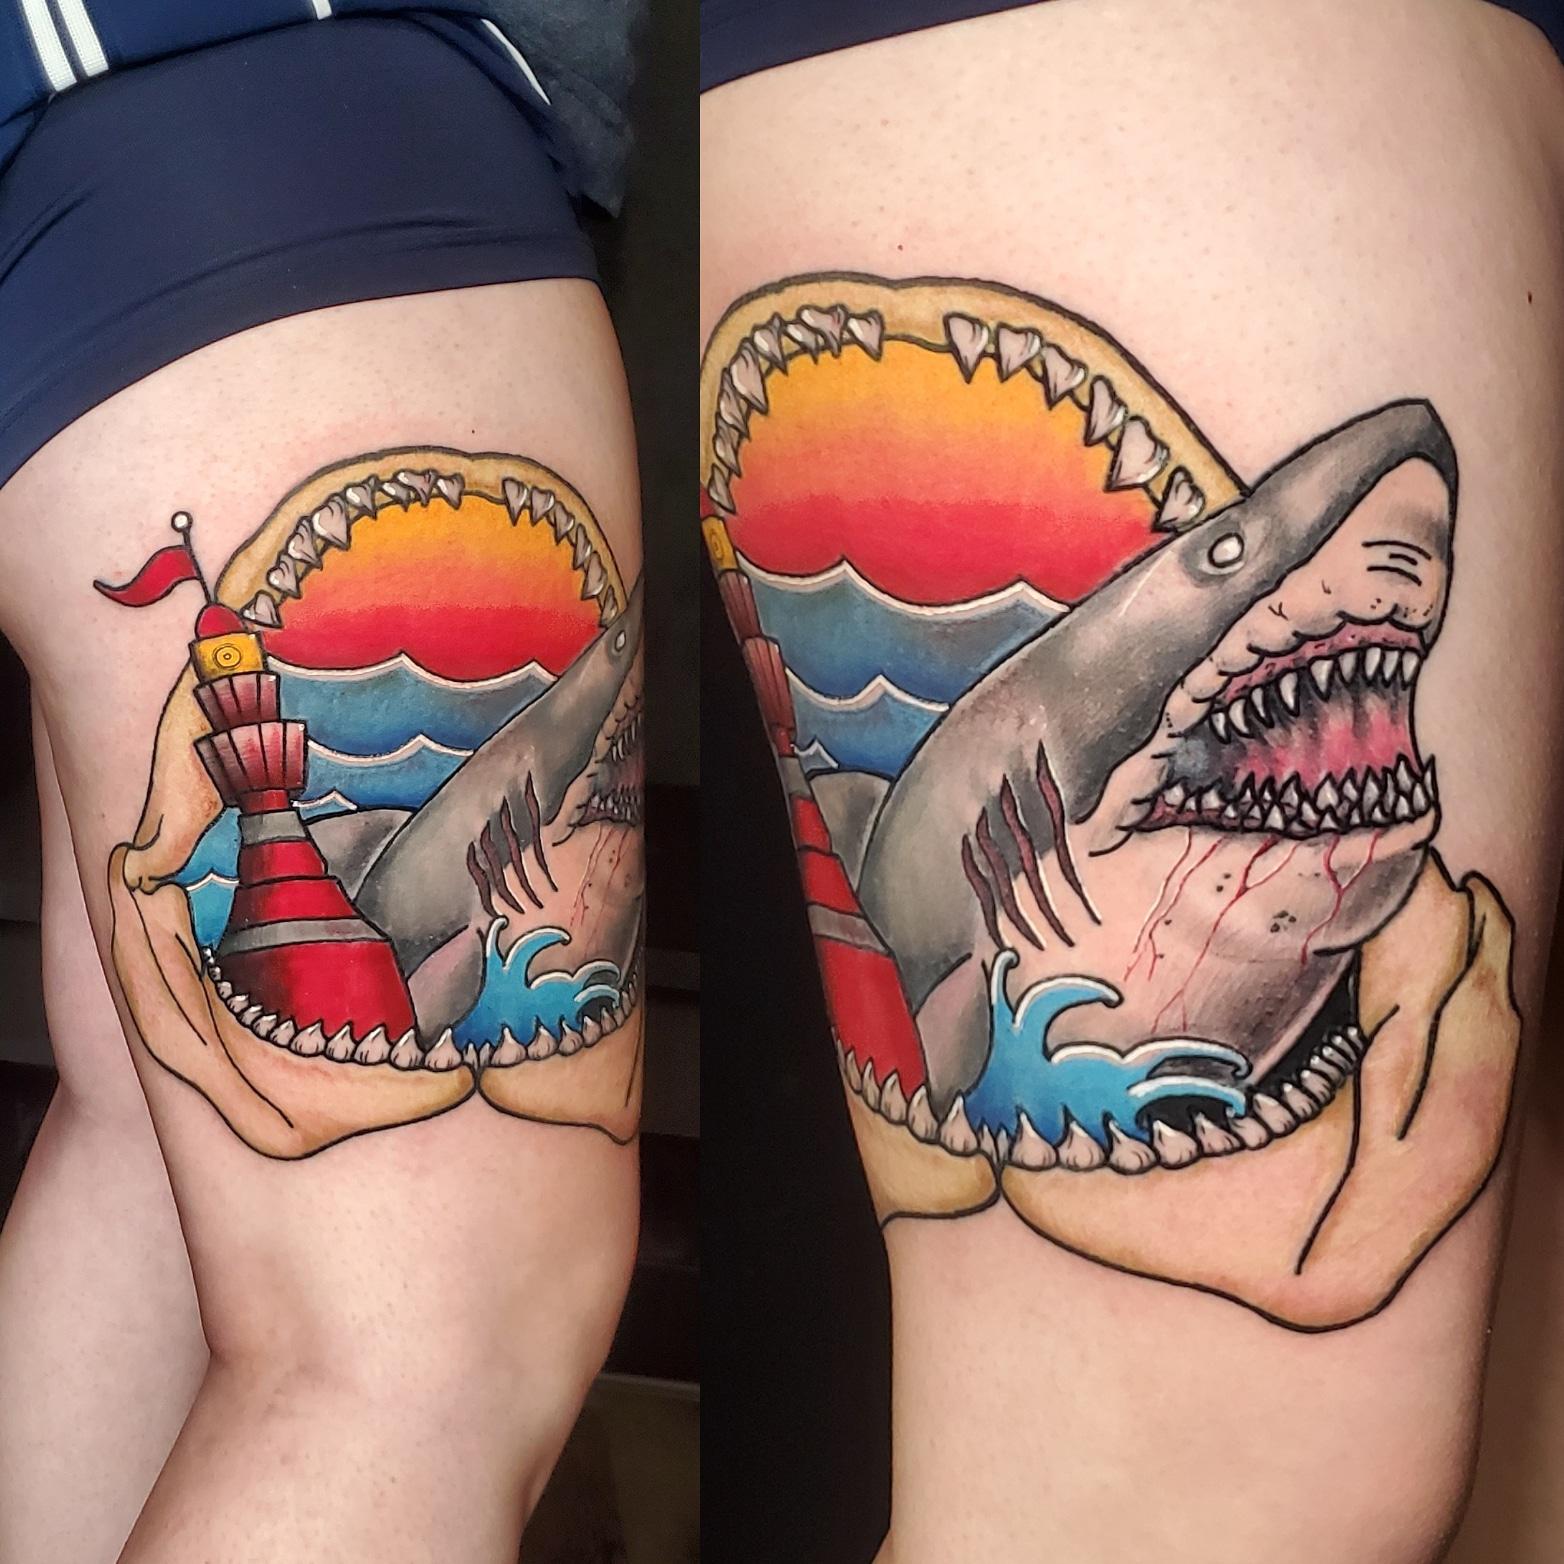 Shark Jaw Tattoo Meaning: Exploring the Symbolic Meanings Behind Shark Jaw Tattoos